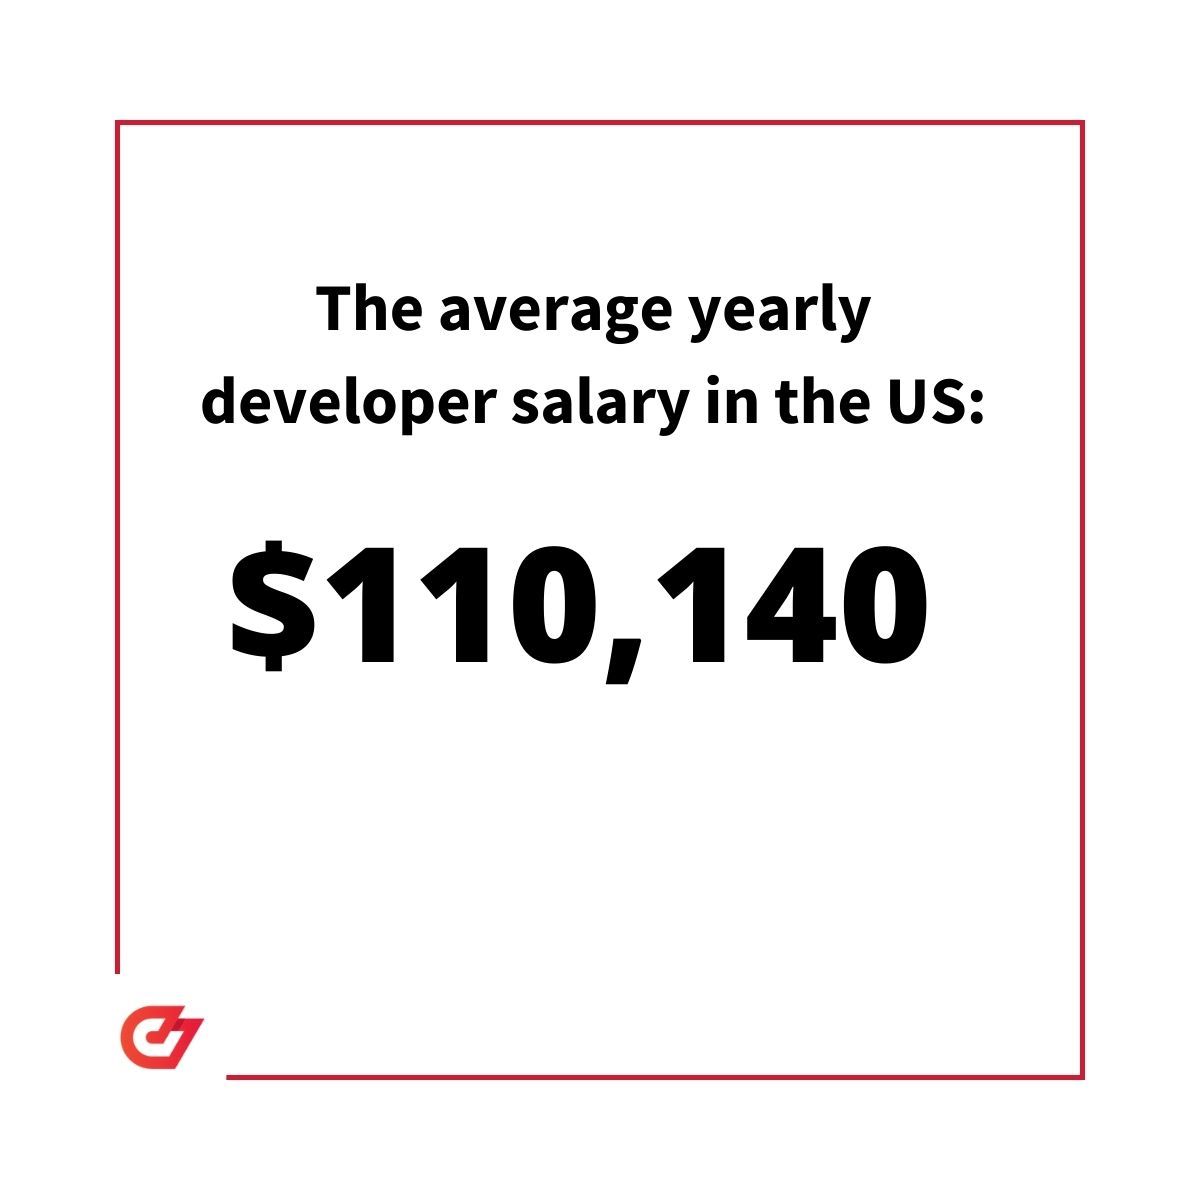 Average developer salary in the US was $110,140 in 2020